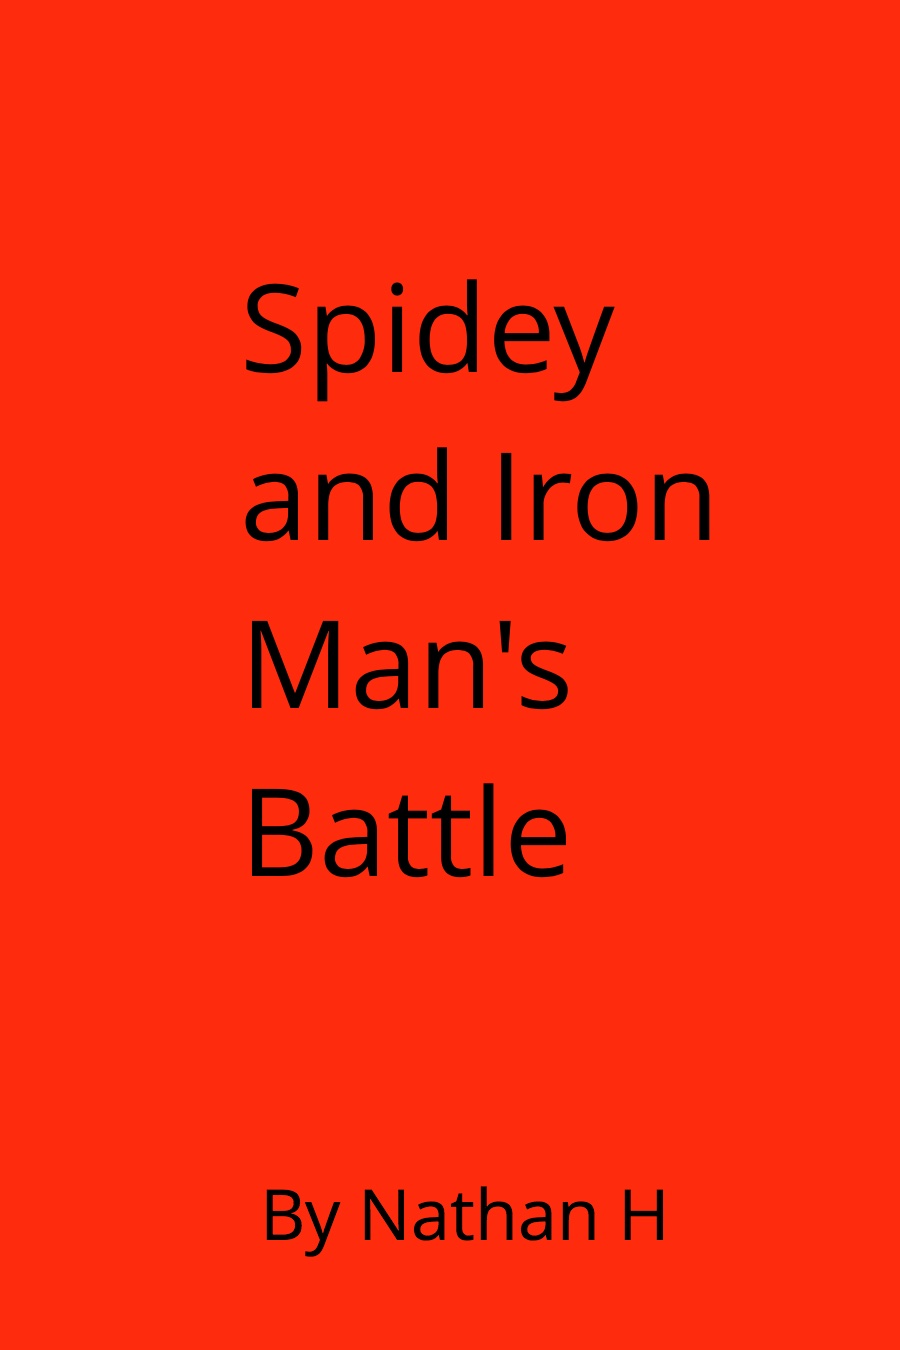 Spidey and Iron Man’s Battle by Nathan H